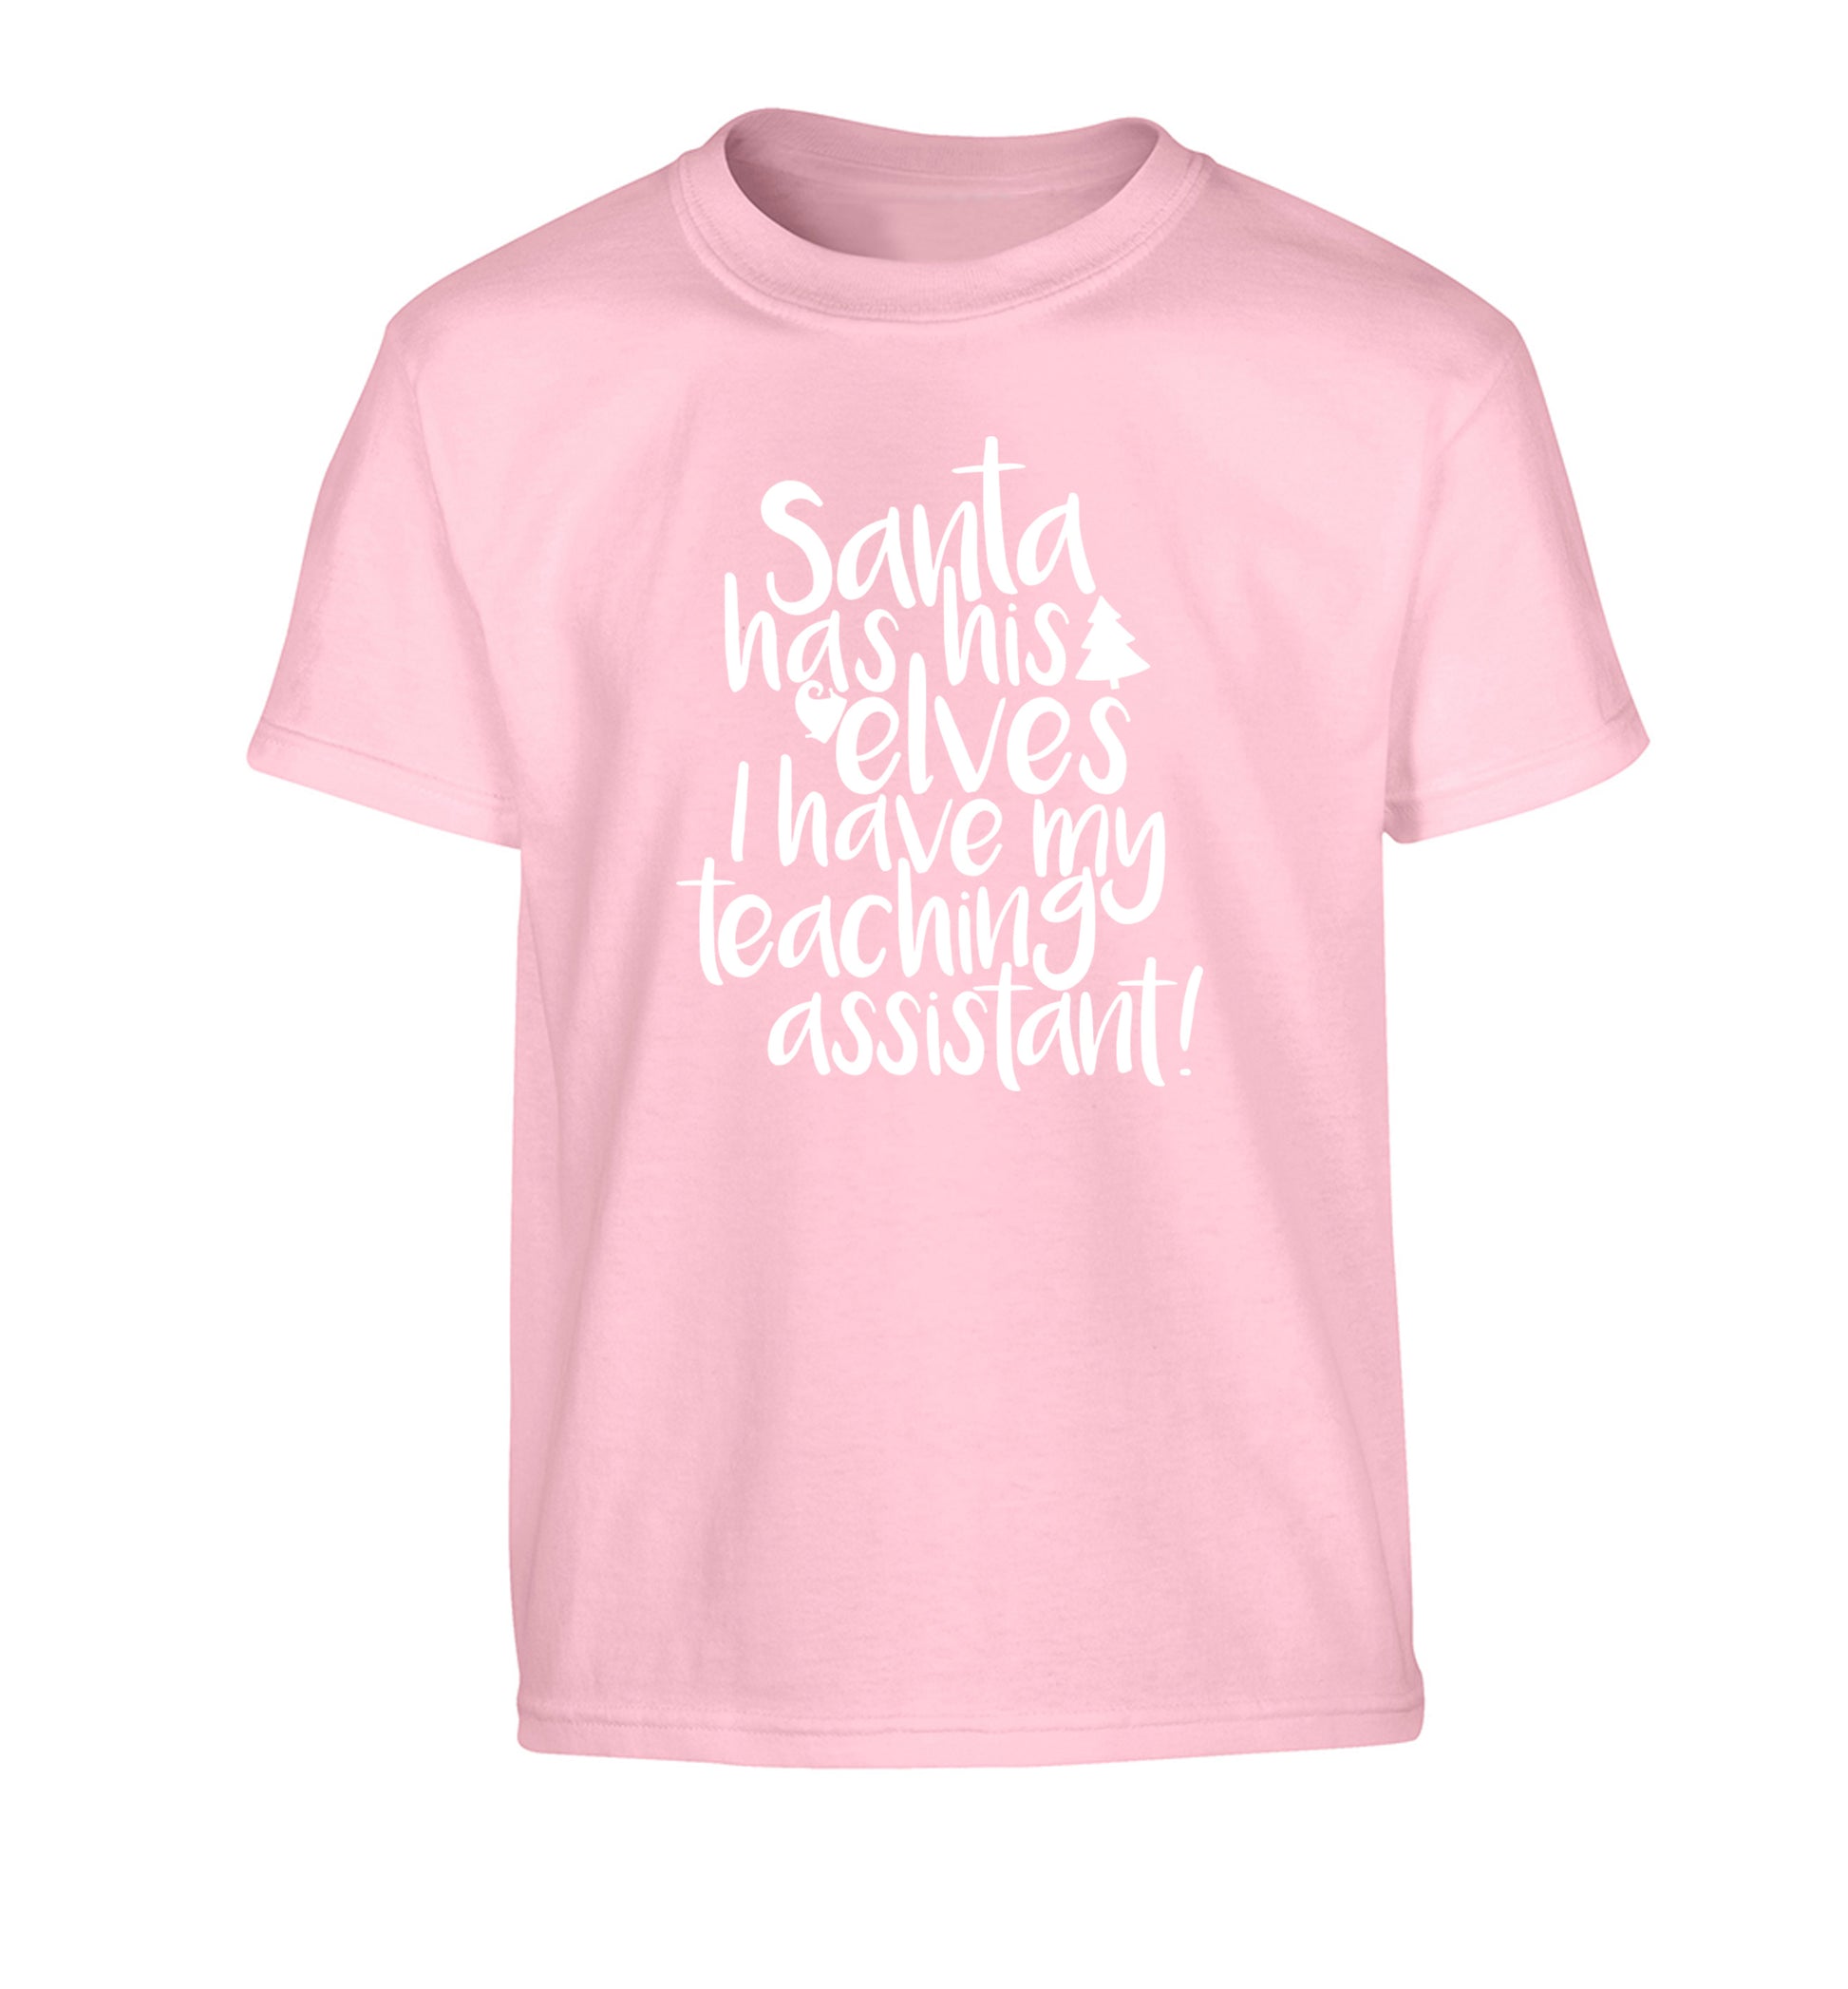 Santa has his elves I have my teaching assistant Children's light pink Tshirt 12-14 Years